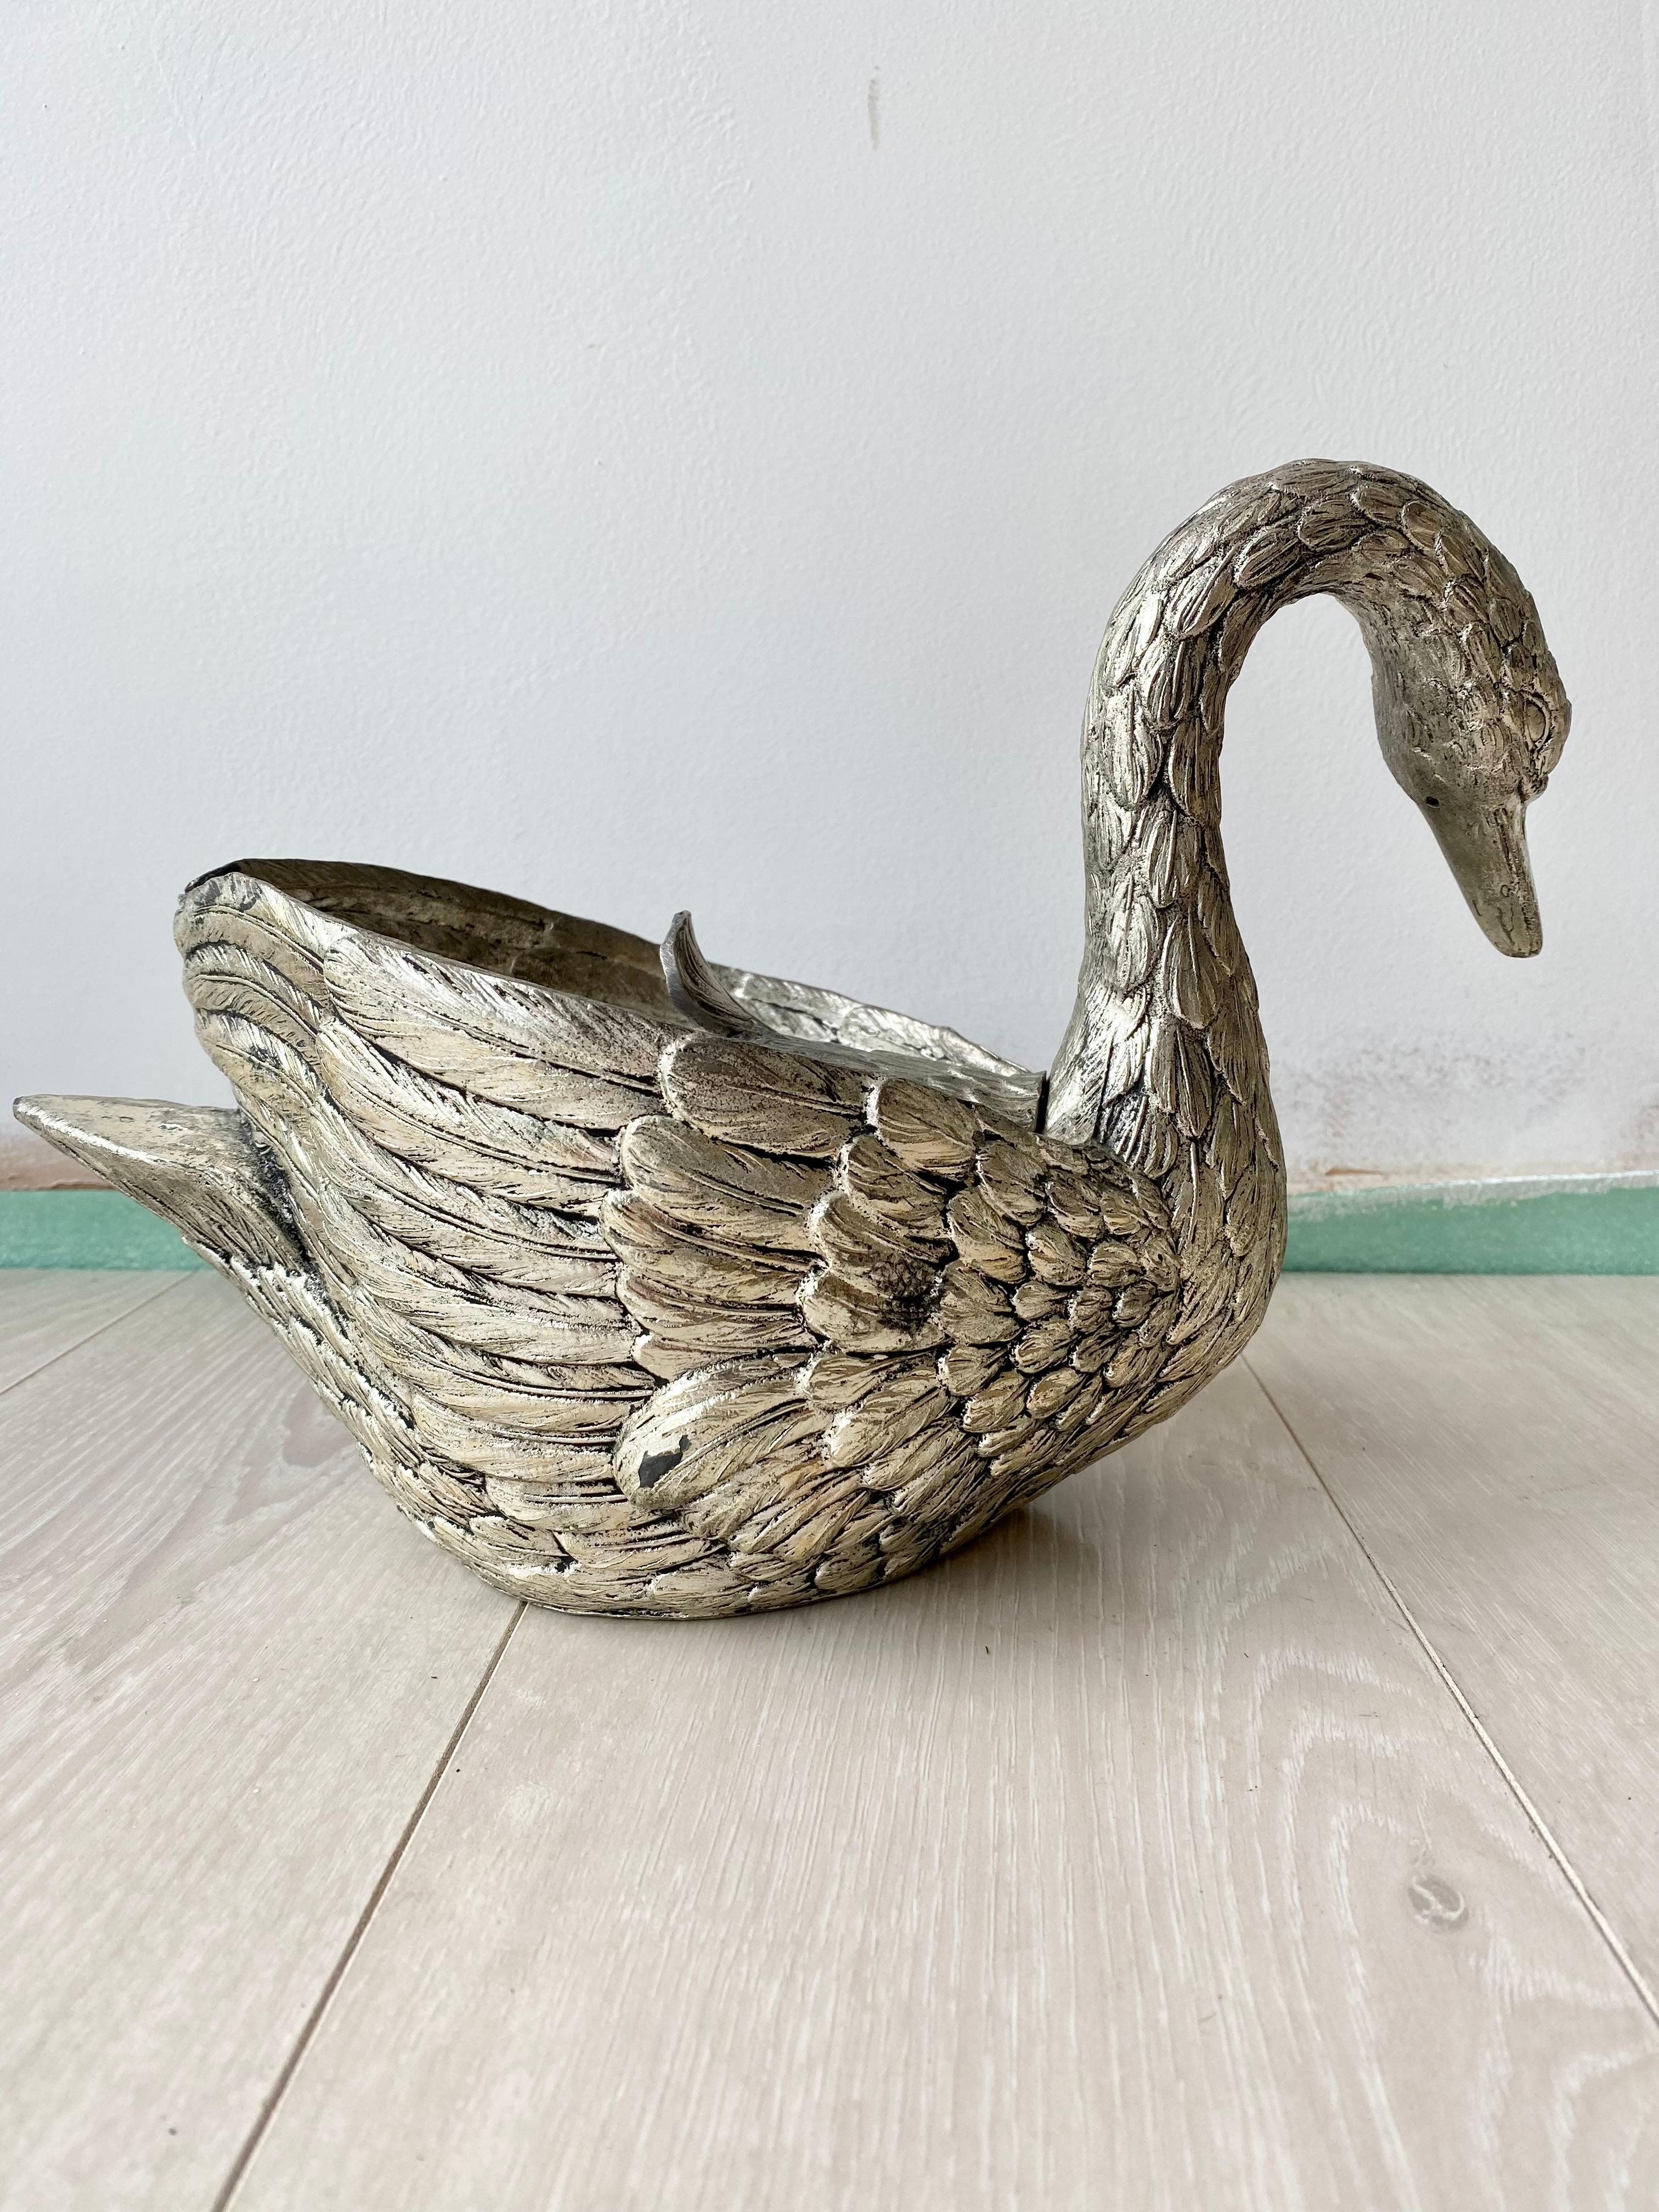 Vintage swan ice bucket signed by Mauro Manetti.

This high-quality ice bucket is a real collector's item and has a luxurious appeal.

Original, 1970s - signed 

Good condition.

